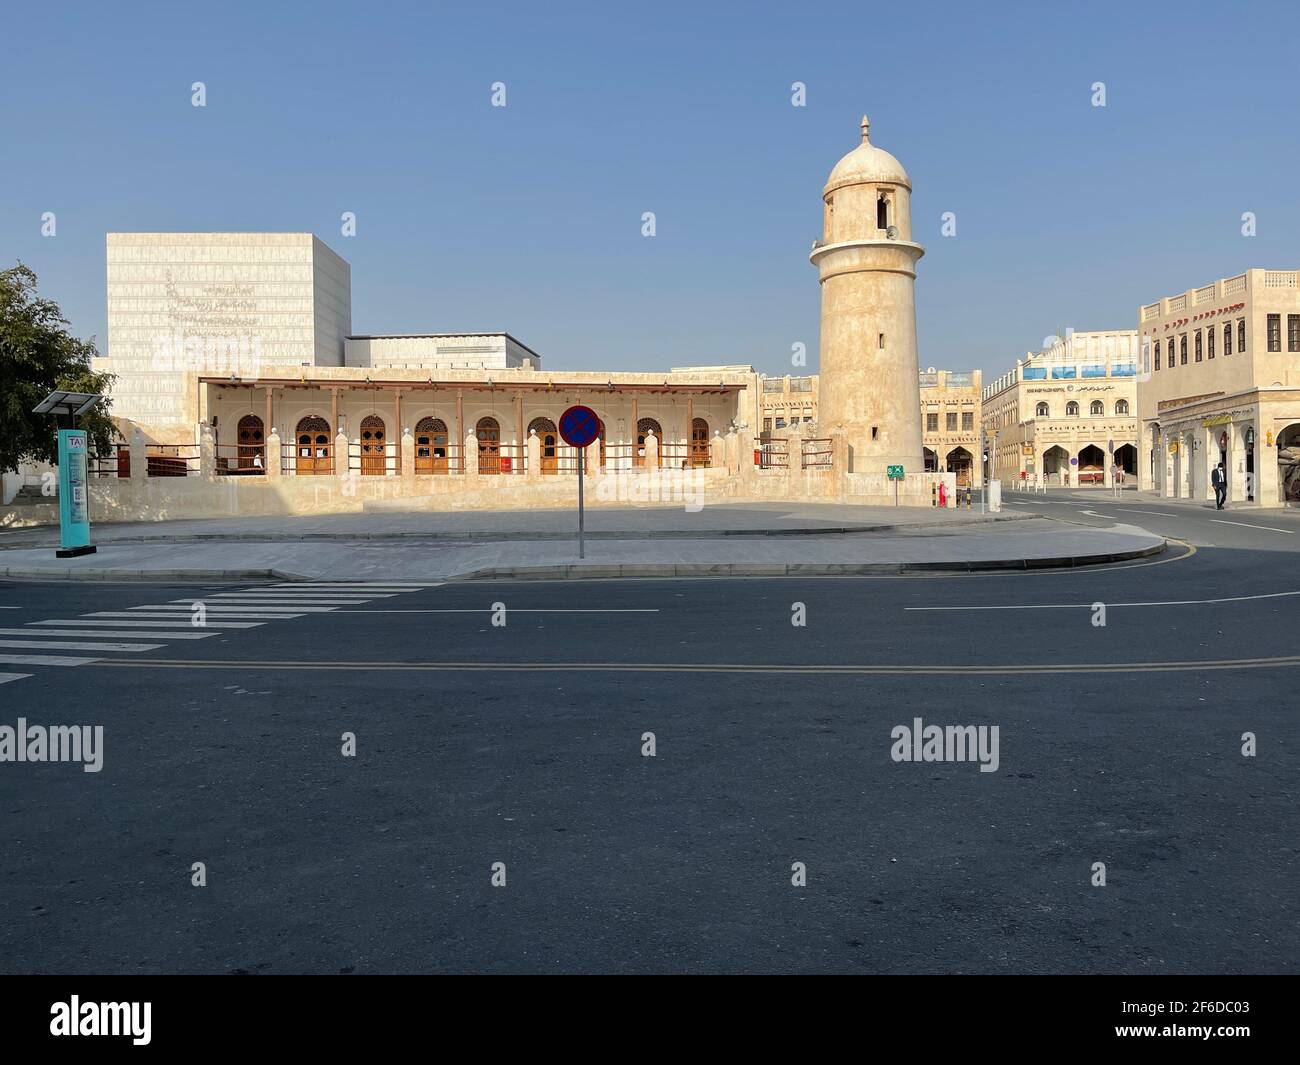 Al Ahmad Mosque, ancient mosque with its minaret in the heart of Souq Waqif, old traditional market in Doha center. Stock Photo